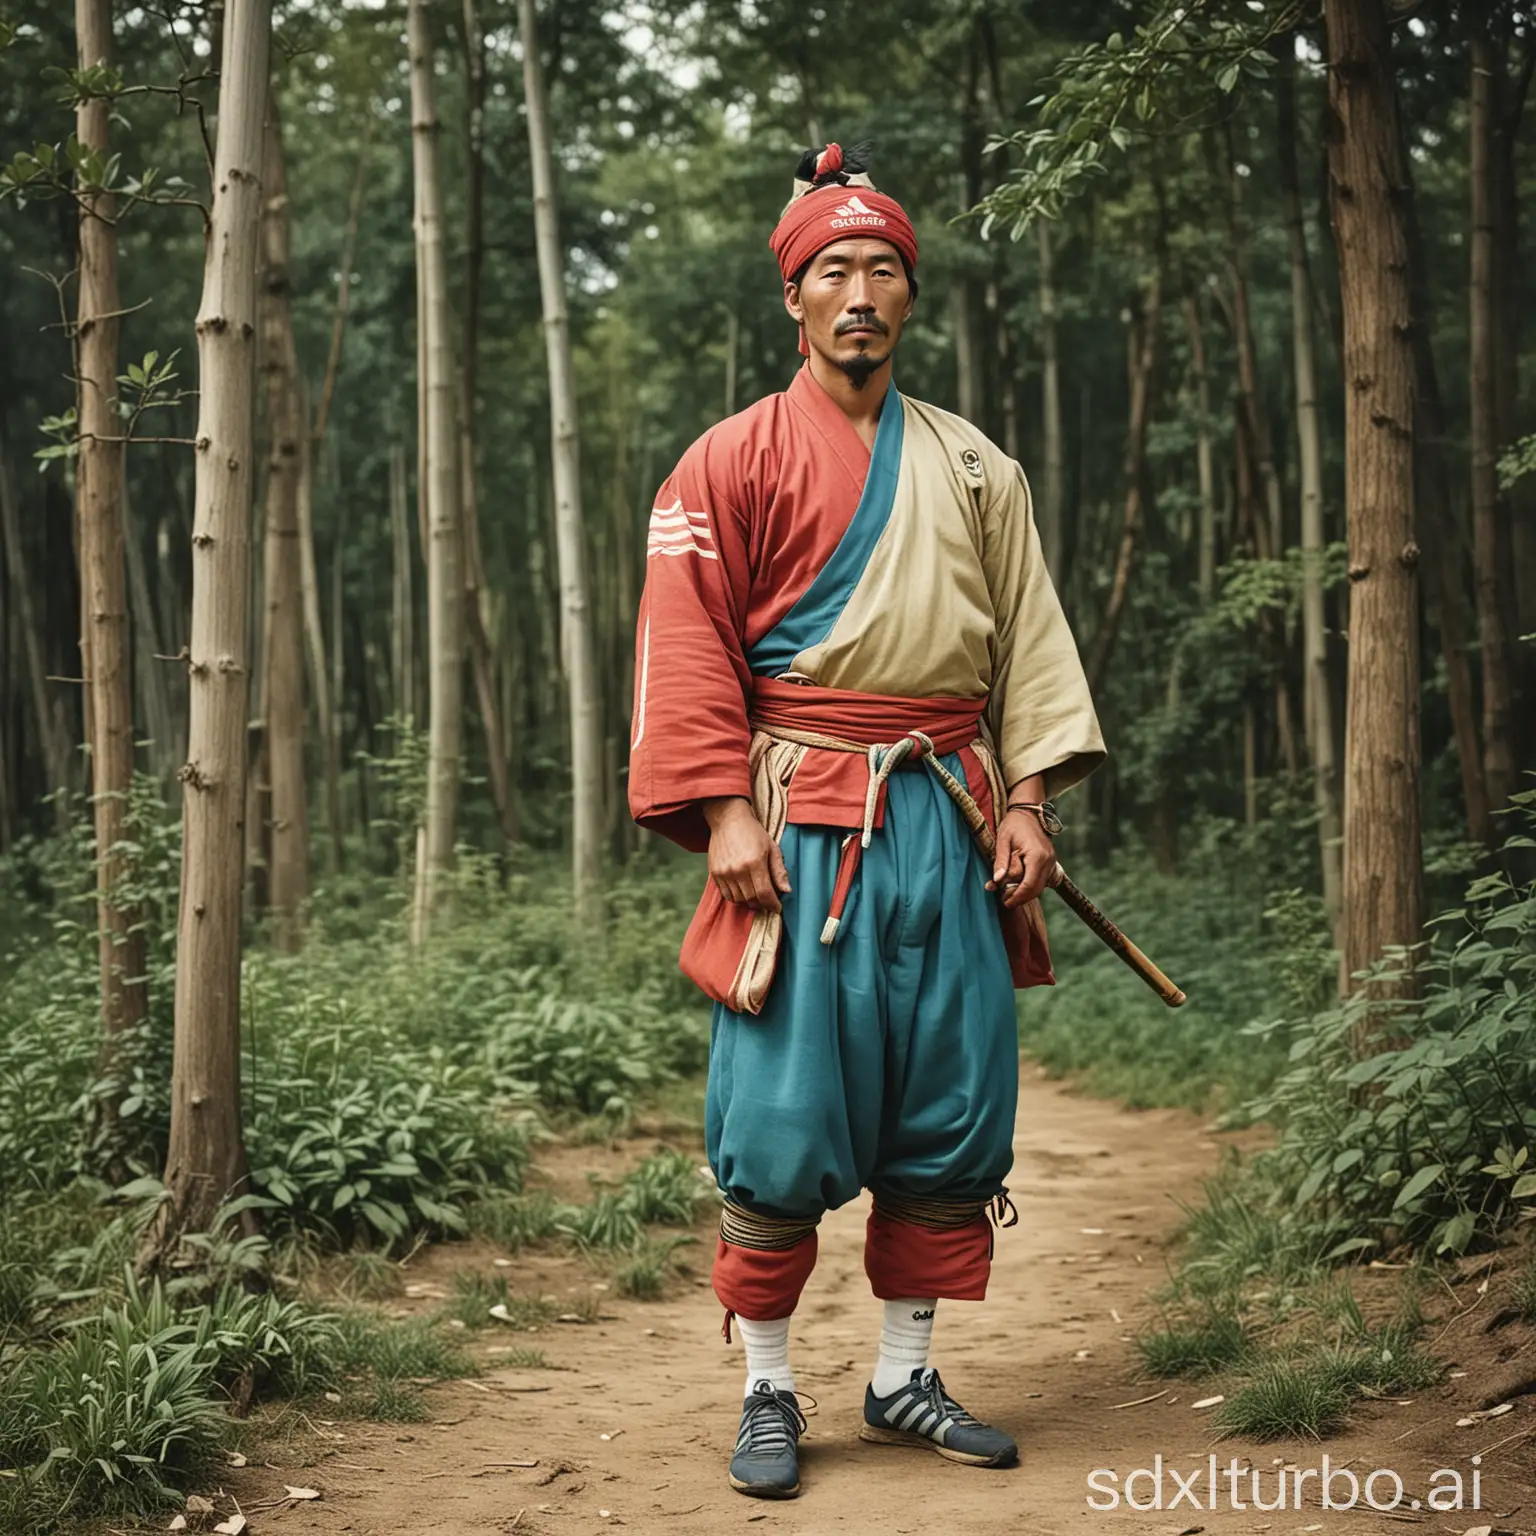 Vintage-Photograph-of-Rural-Versailles-Ronin-Man-in-Colorized-Adidas-Apparel